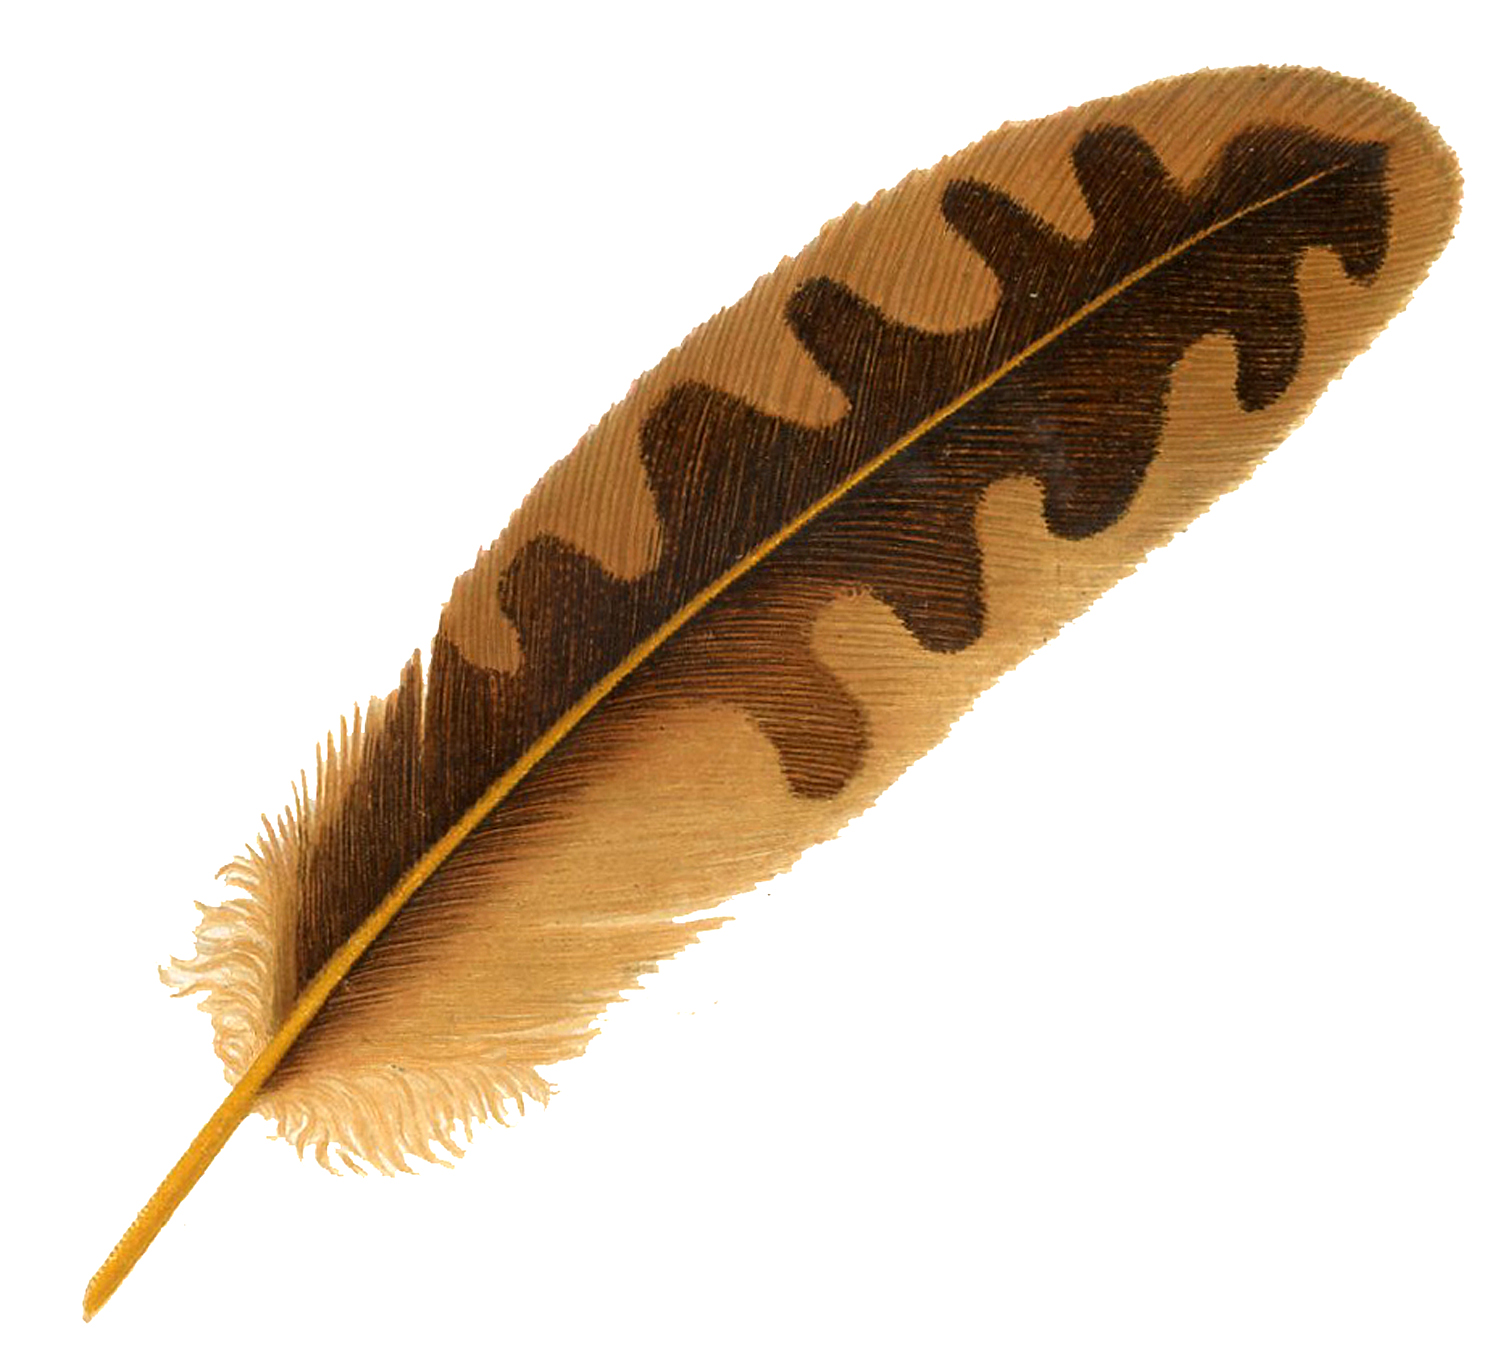 Images of Feather | 1500x1365